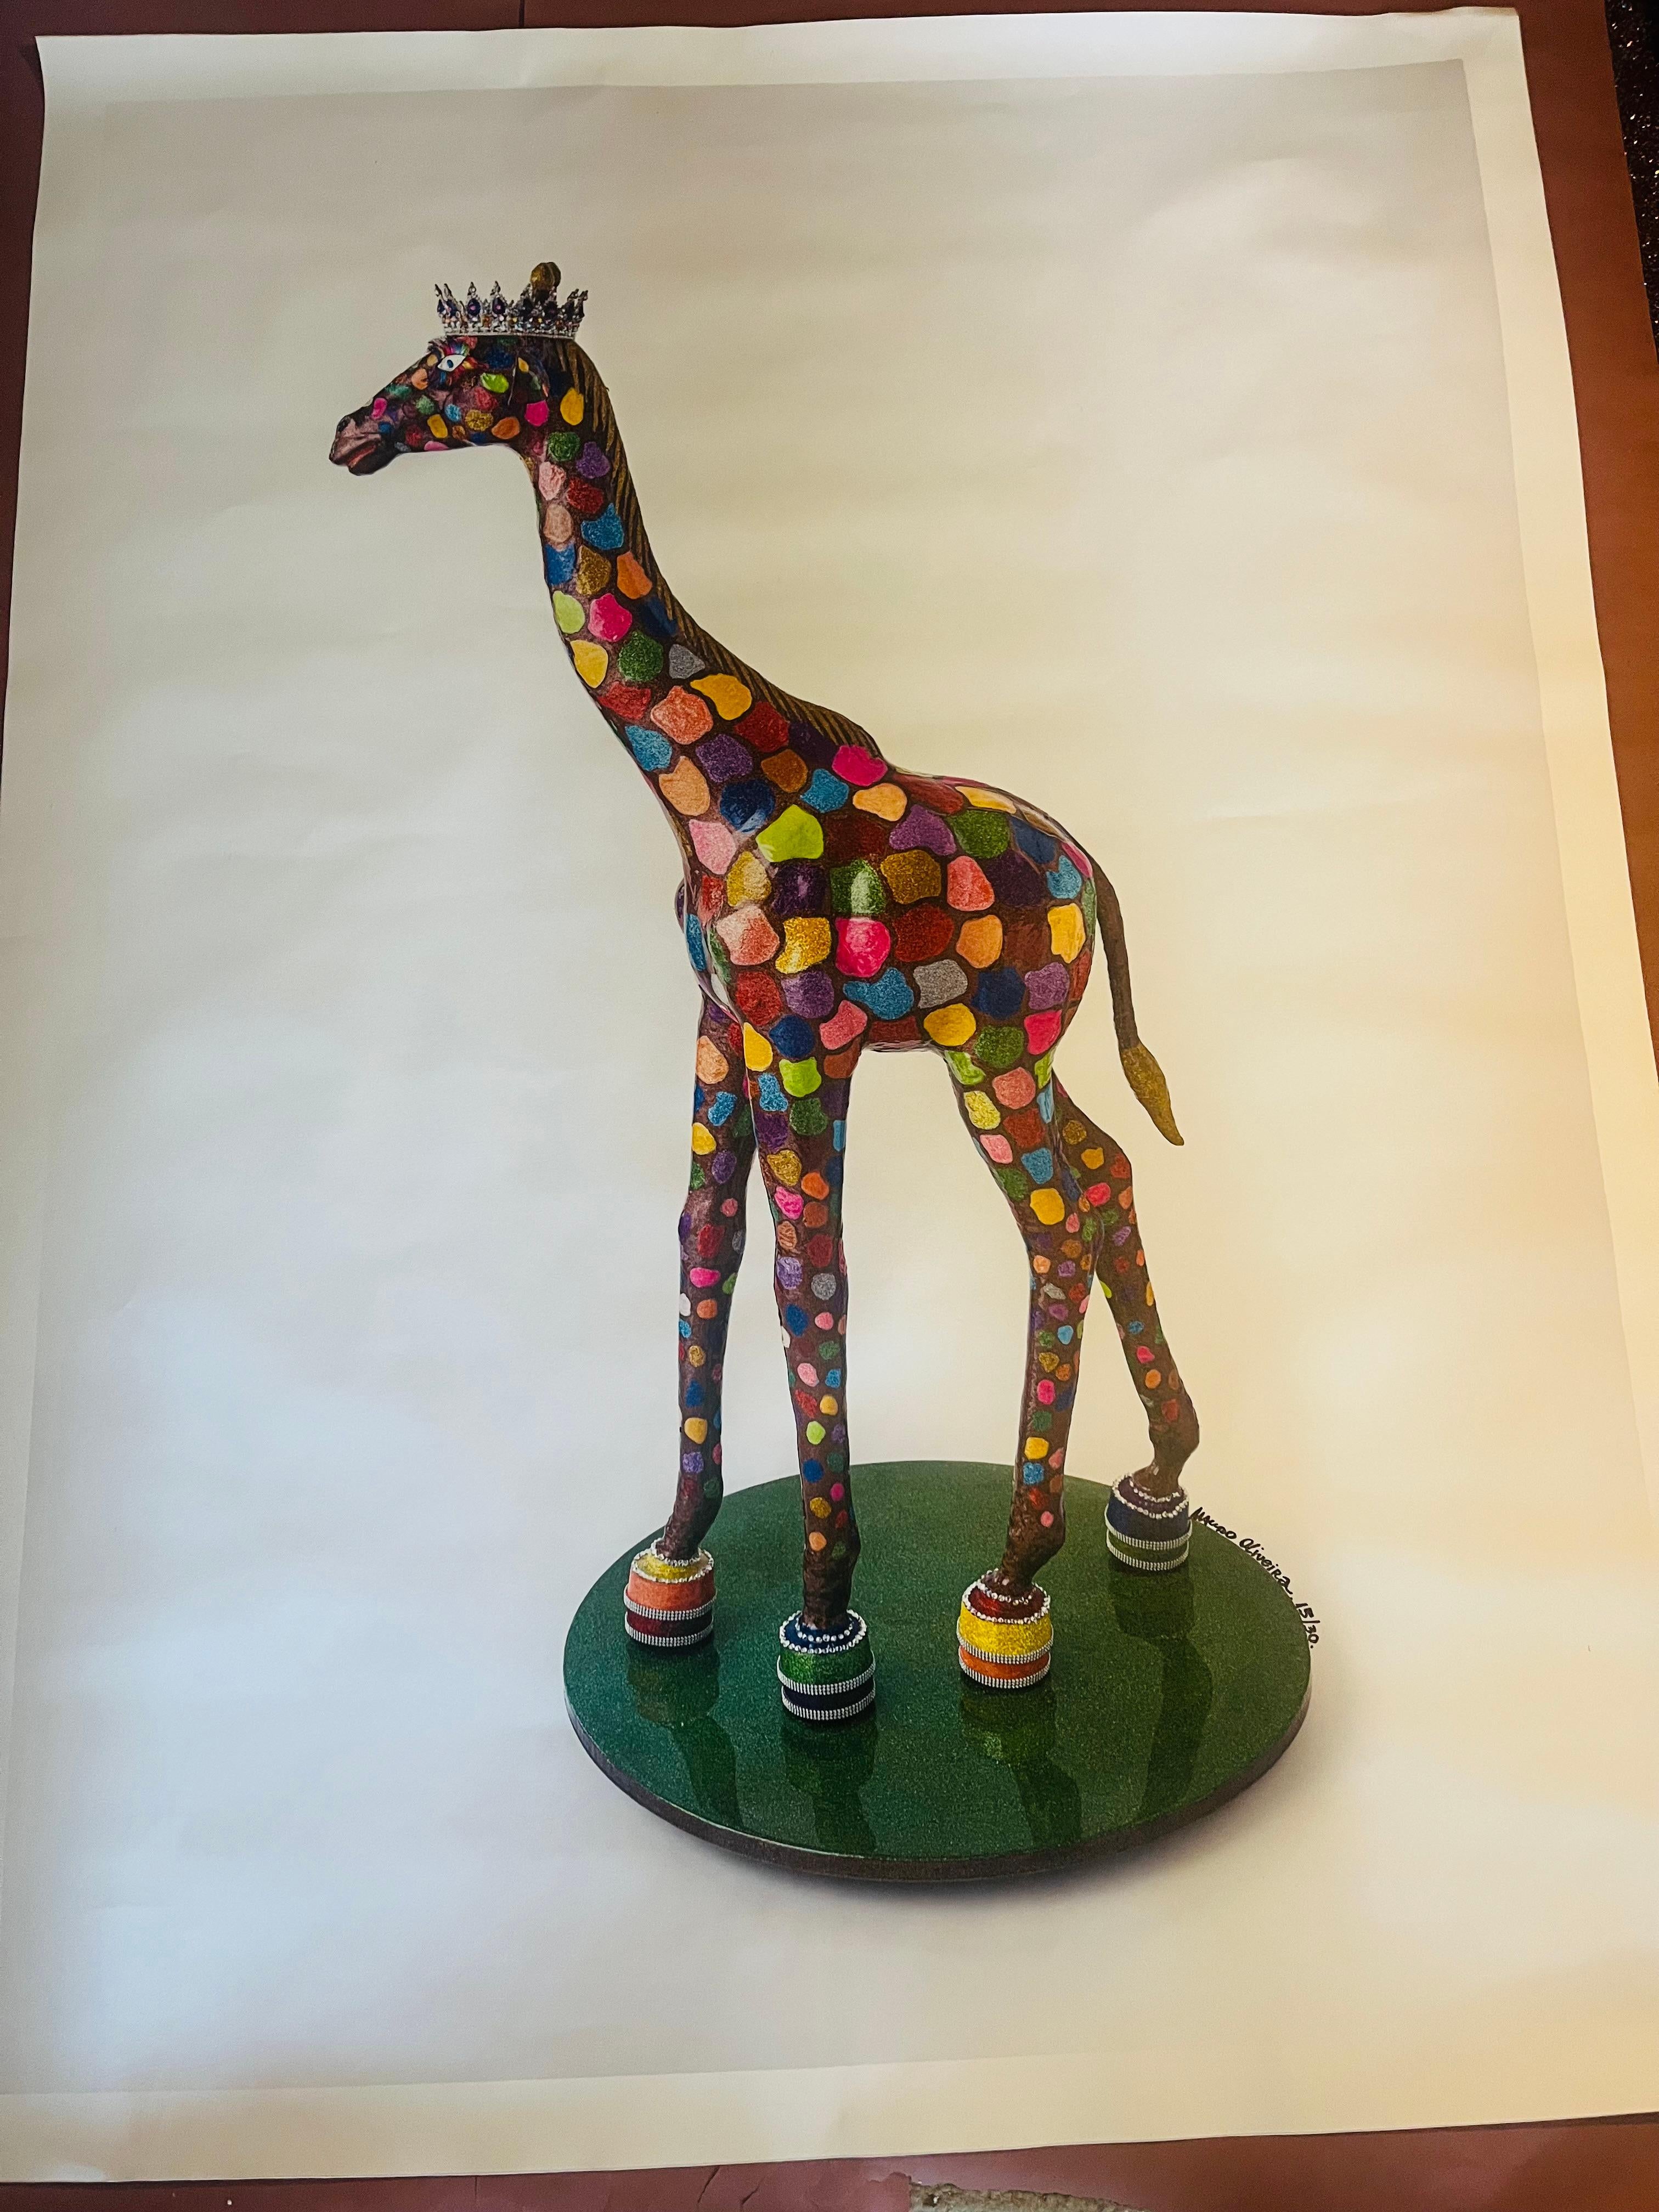               **ANNUAL SUPER SALE UNTIL APRIL 15TH ONLY**
*This Price Won't Be Repeated Again This Year-Take Advantage Of It*

GIGI: Serengeti Dancing Queen is a very special giraffe sculpture that was sold even before she was done. It took 3 months